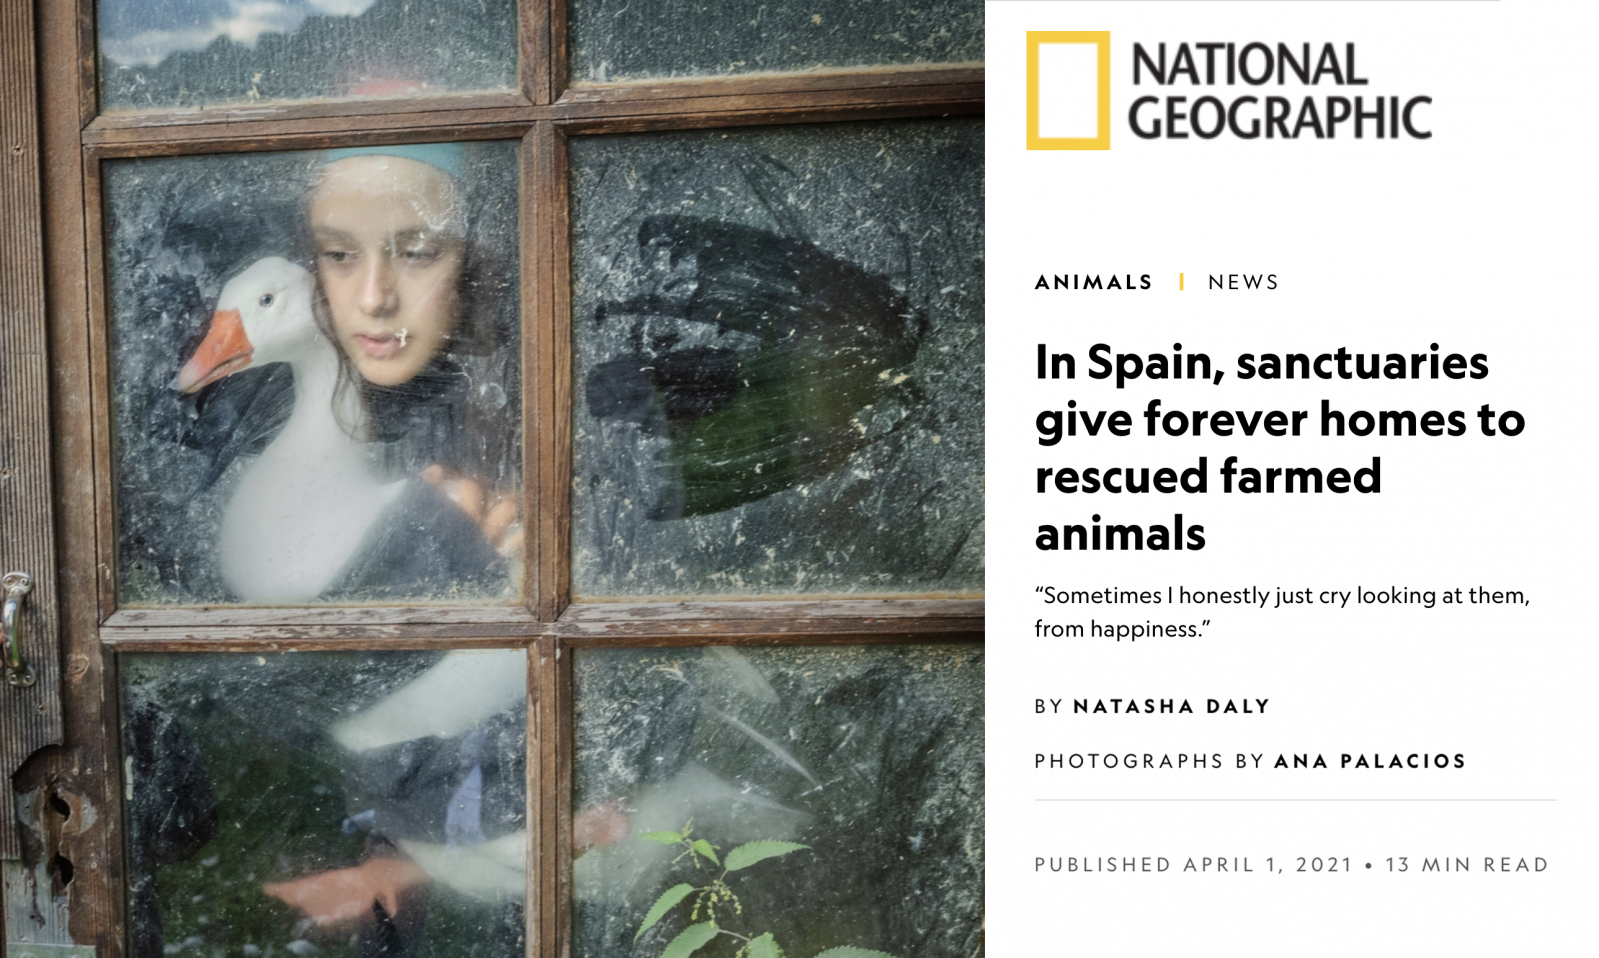 National Geographic: In Spain, sanctuaries give forever homes to rescued farmed animals